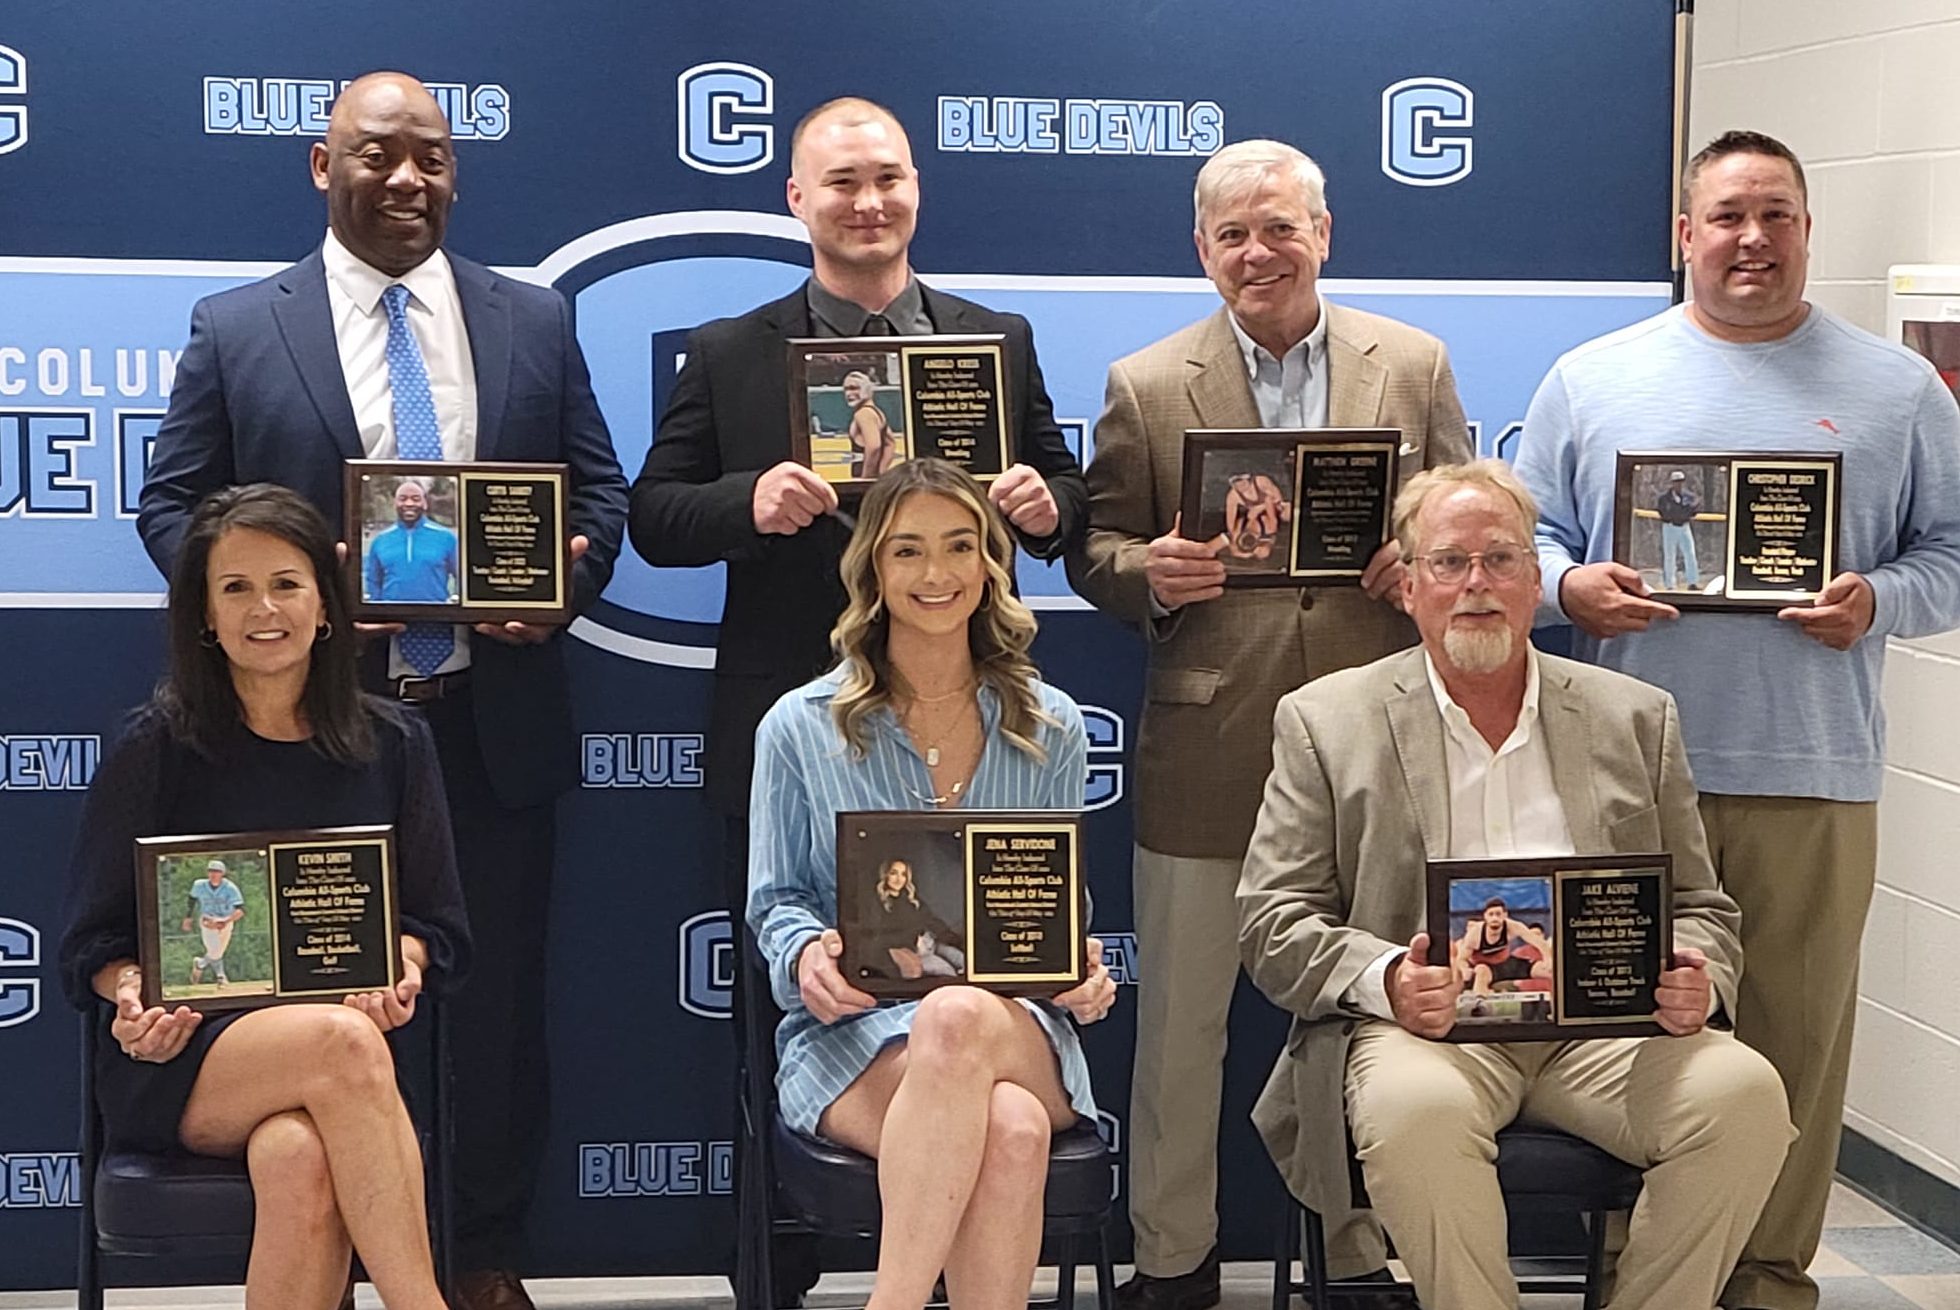 Columbia Athletic Hall of Fame inductees